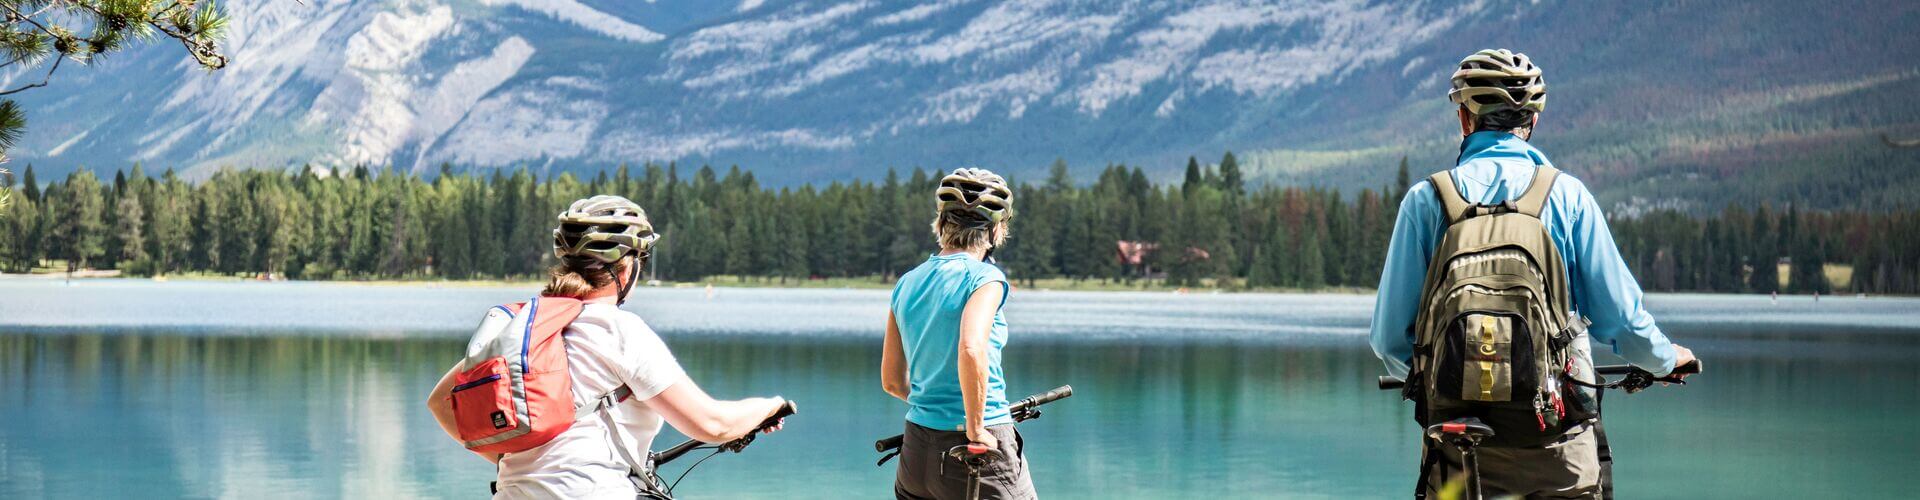 Cyclists looking out over Edith Lake at Jasper National Park